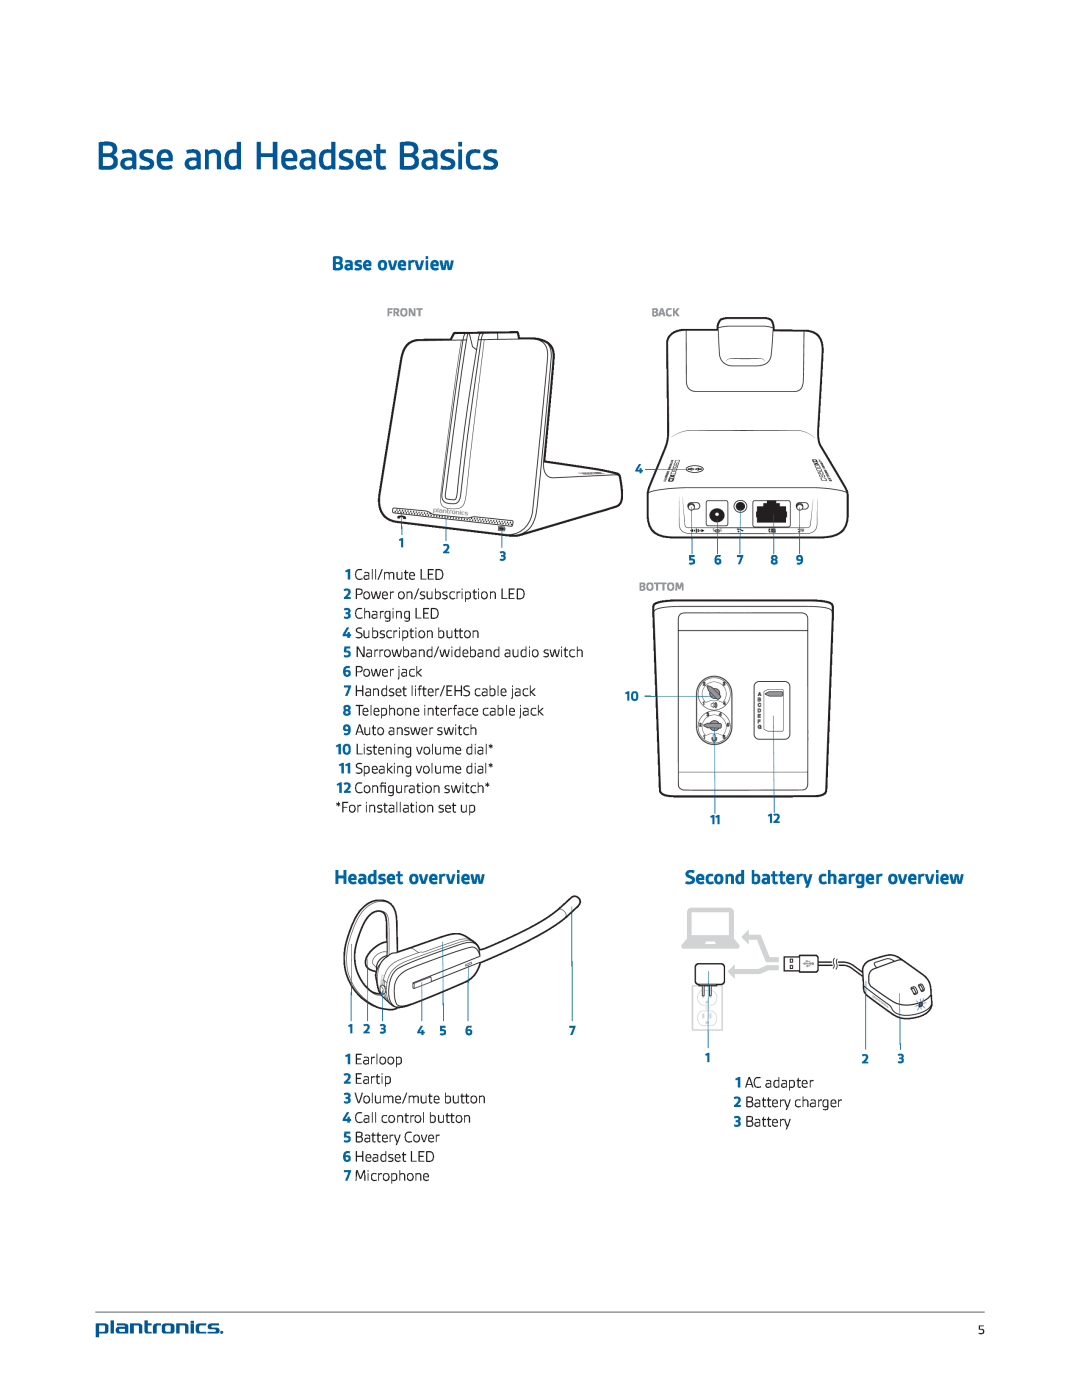 Plantronics CS545-XD Base and Headset Basics, Base overview, Headset overview, Second battery charger overview, Eartip 